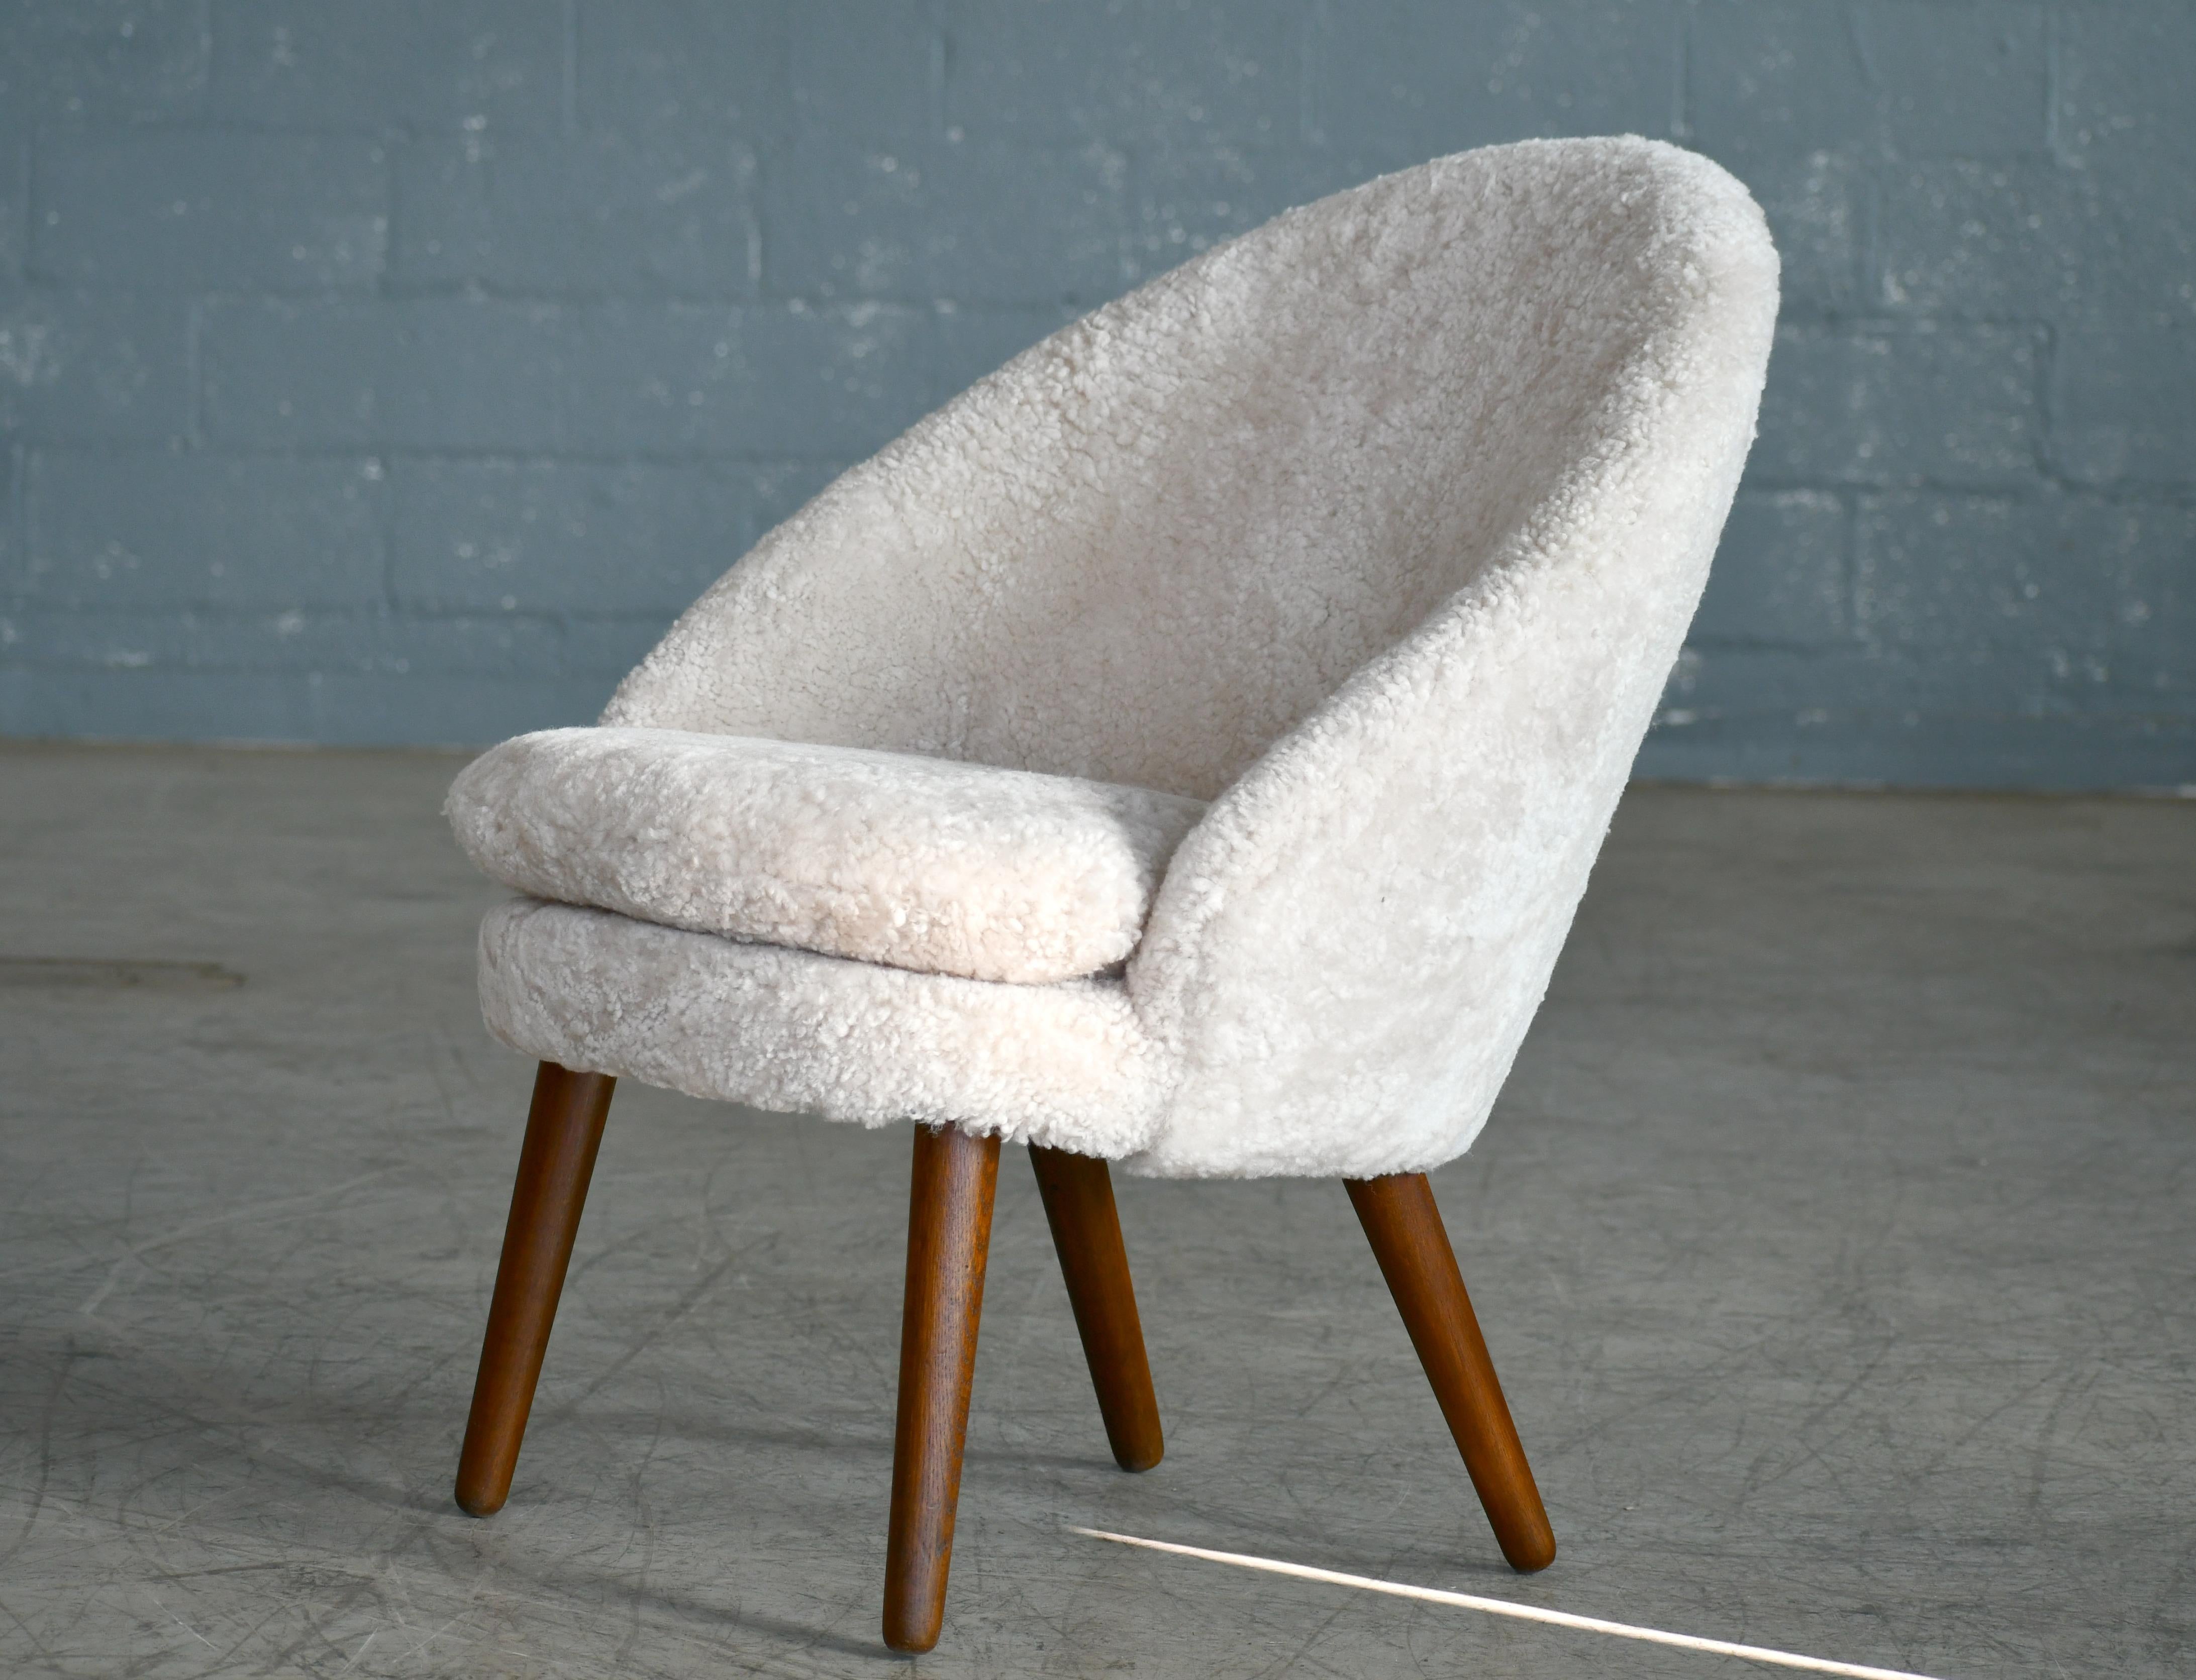 Classic easy chair with curved back and legs in solid oak designed by Ejvind A. Johansson in 1958 as Model 301 for Gotfred H. Petersen. Newly refurbished and re-upholstered in putty colored curly fancy shearling sheepskin from Dualoy. Super